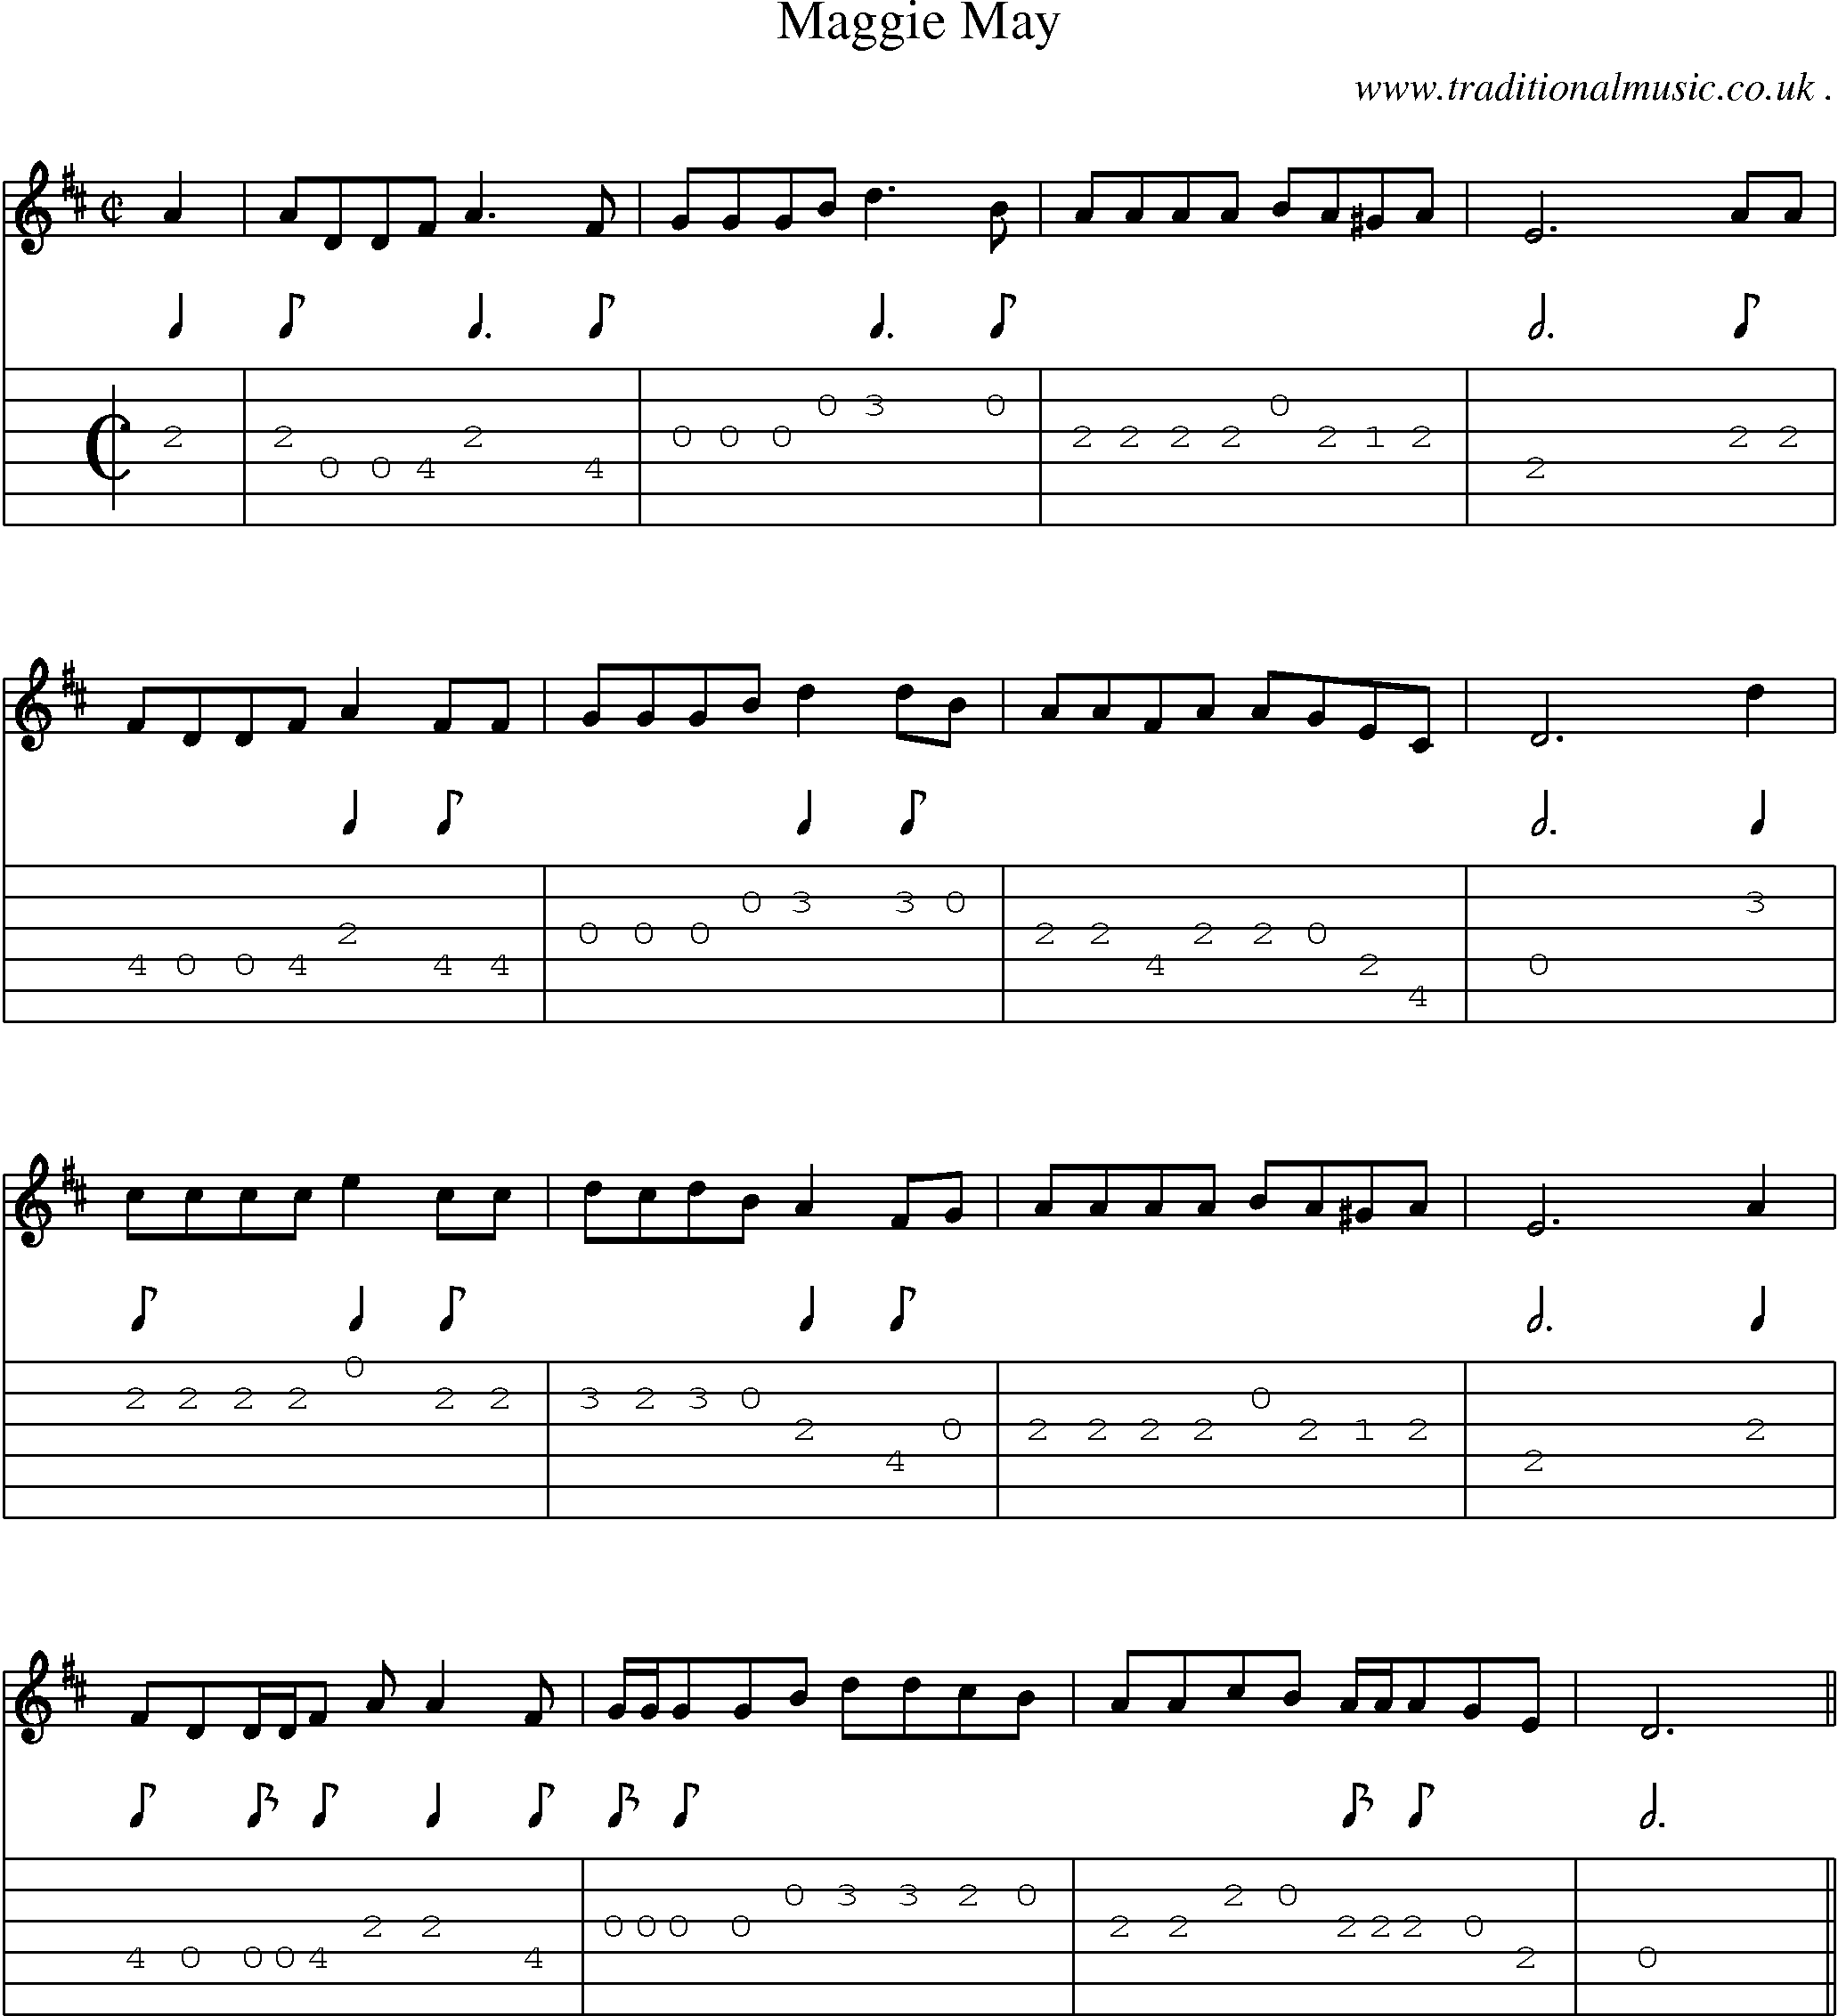 Sheet-Music and Guitar Tabs for Maggie May